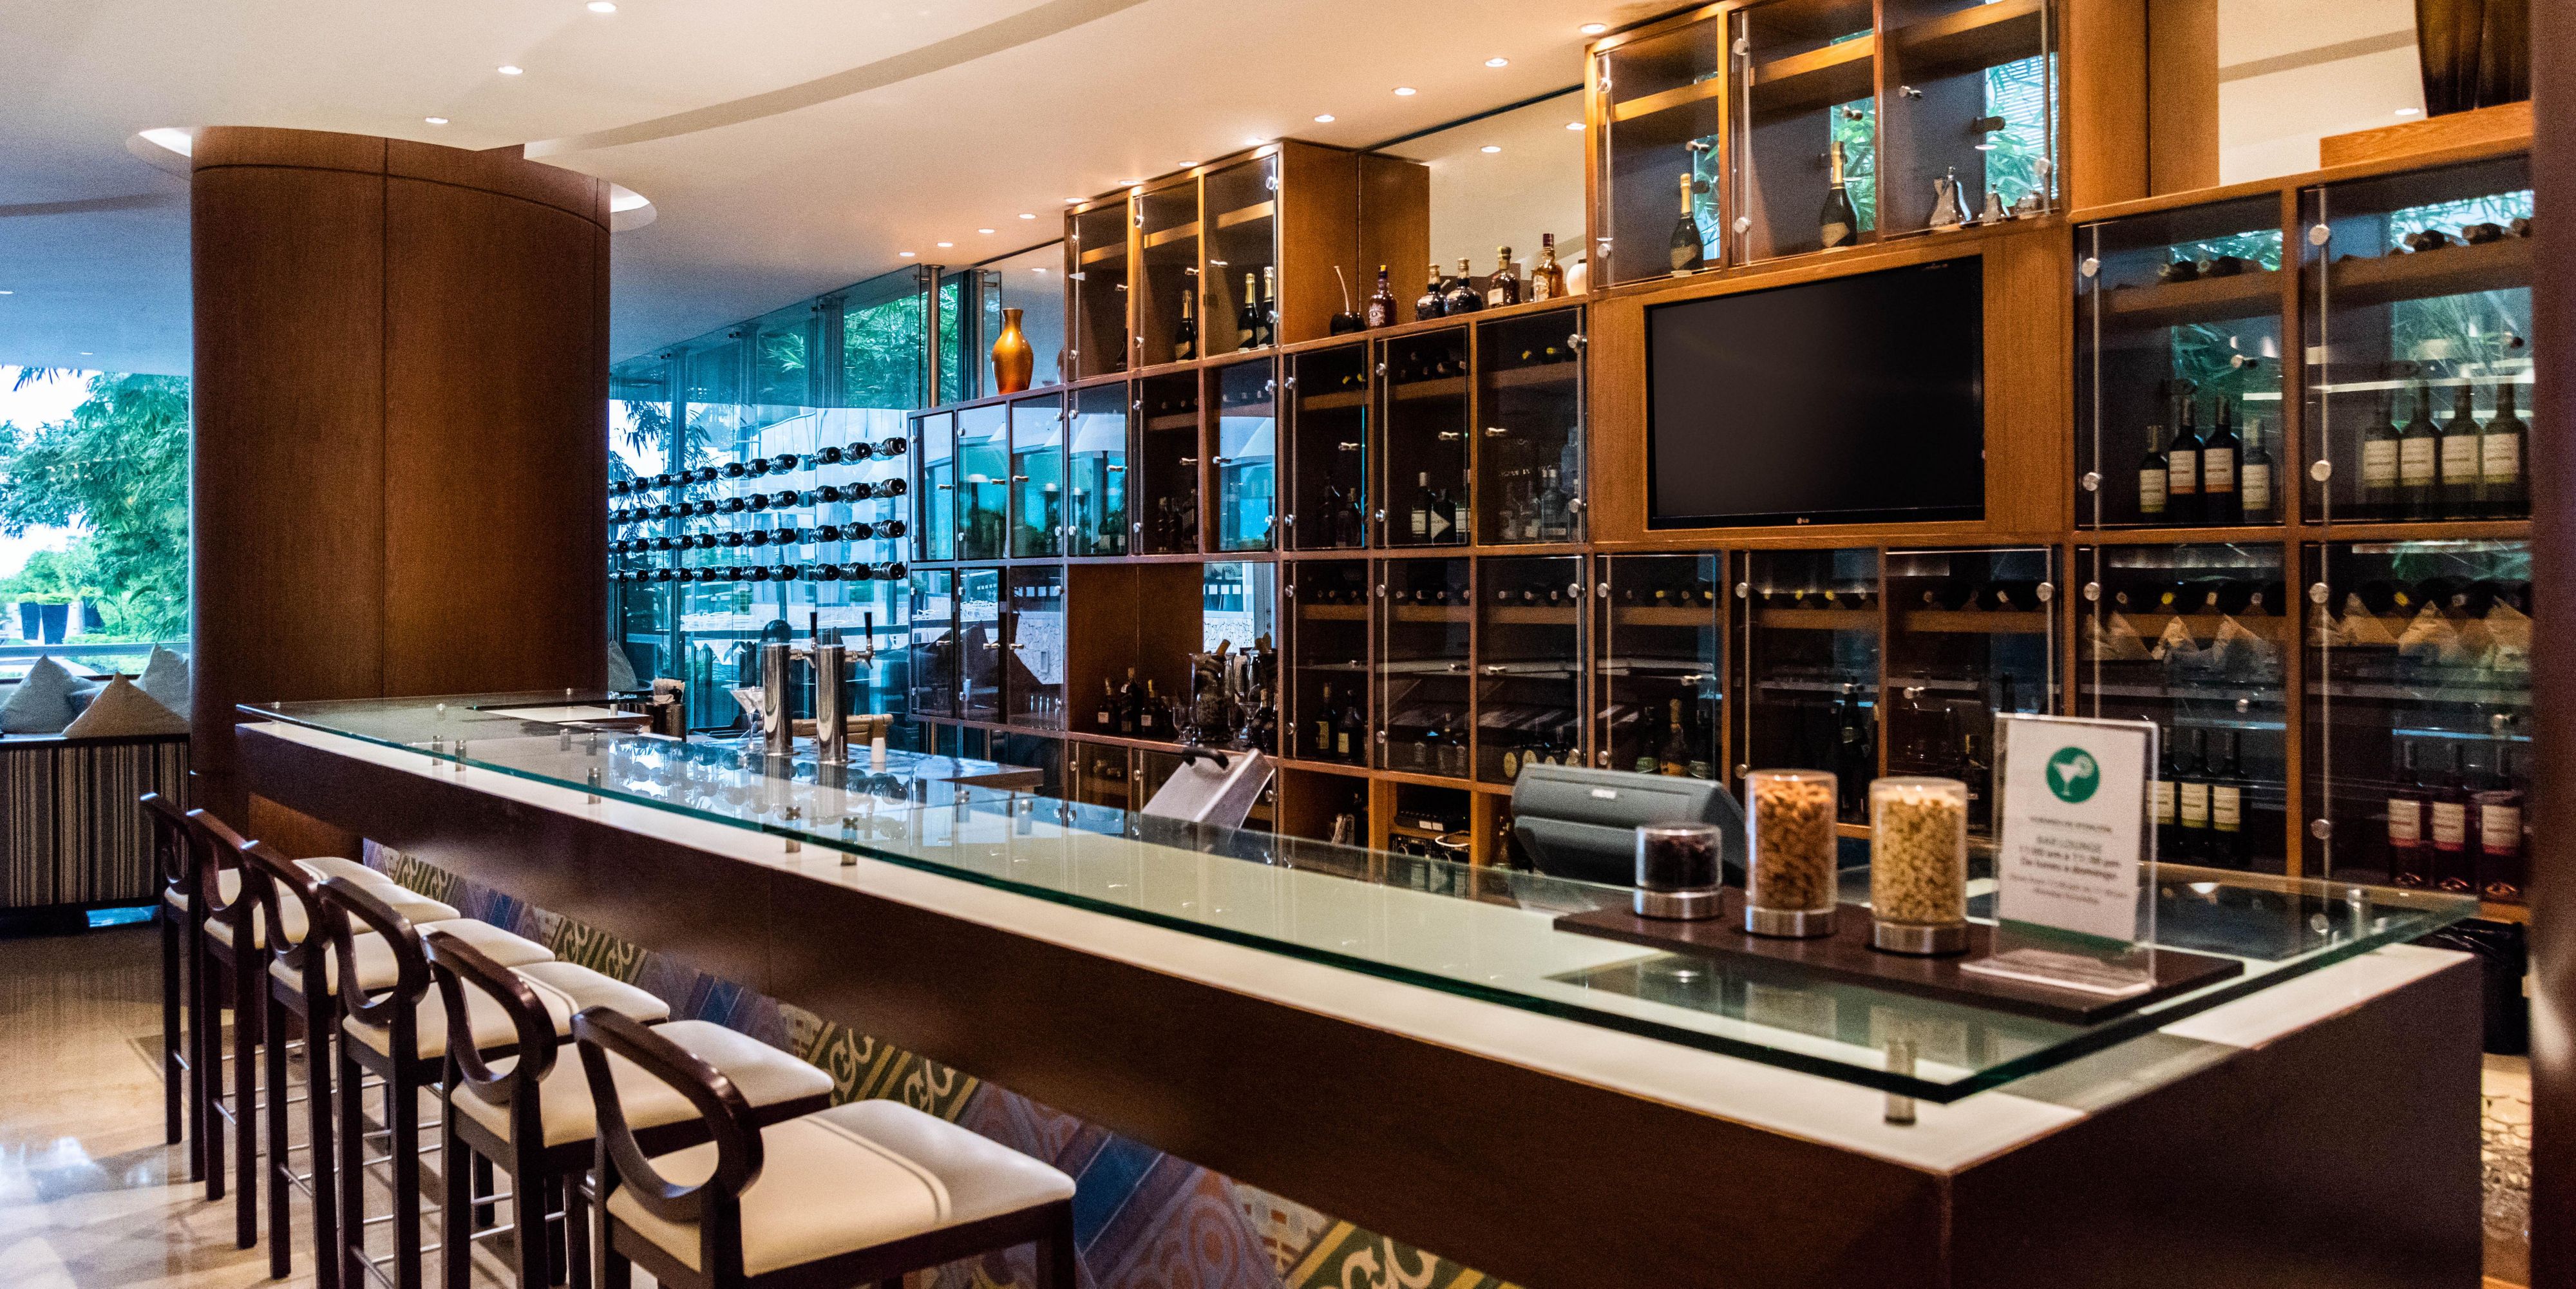 Our Bar offers a delicious selection of beverages and snacks.